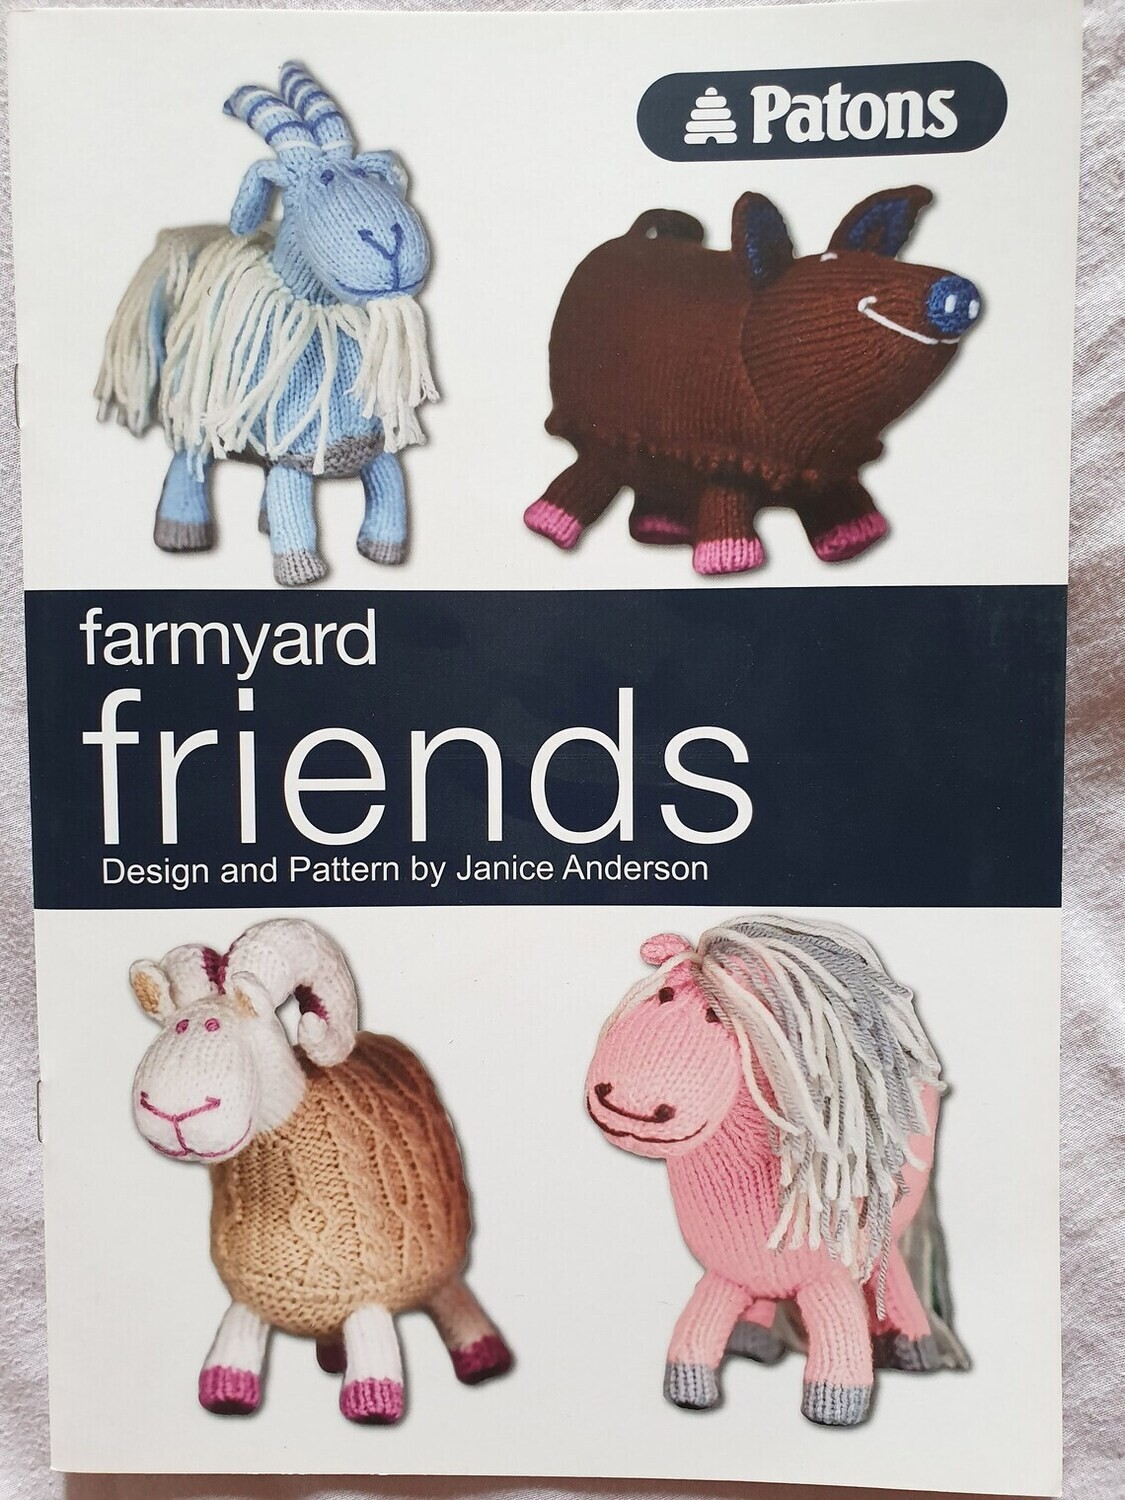 Farmyard Friends knitting book by Patons